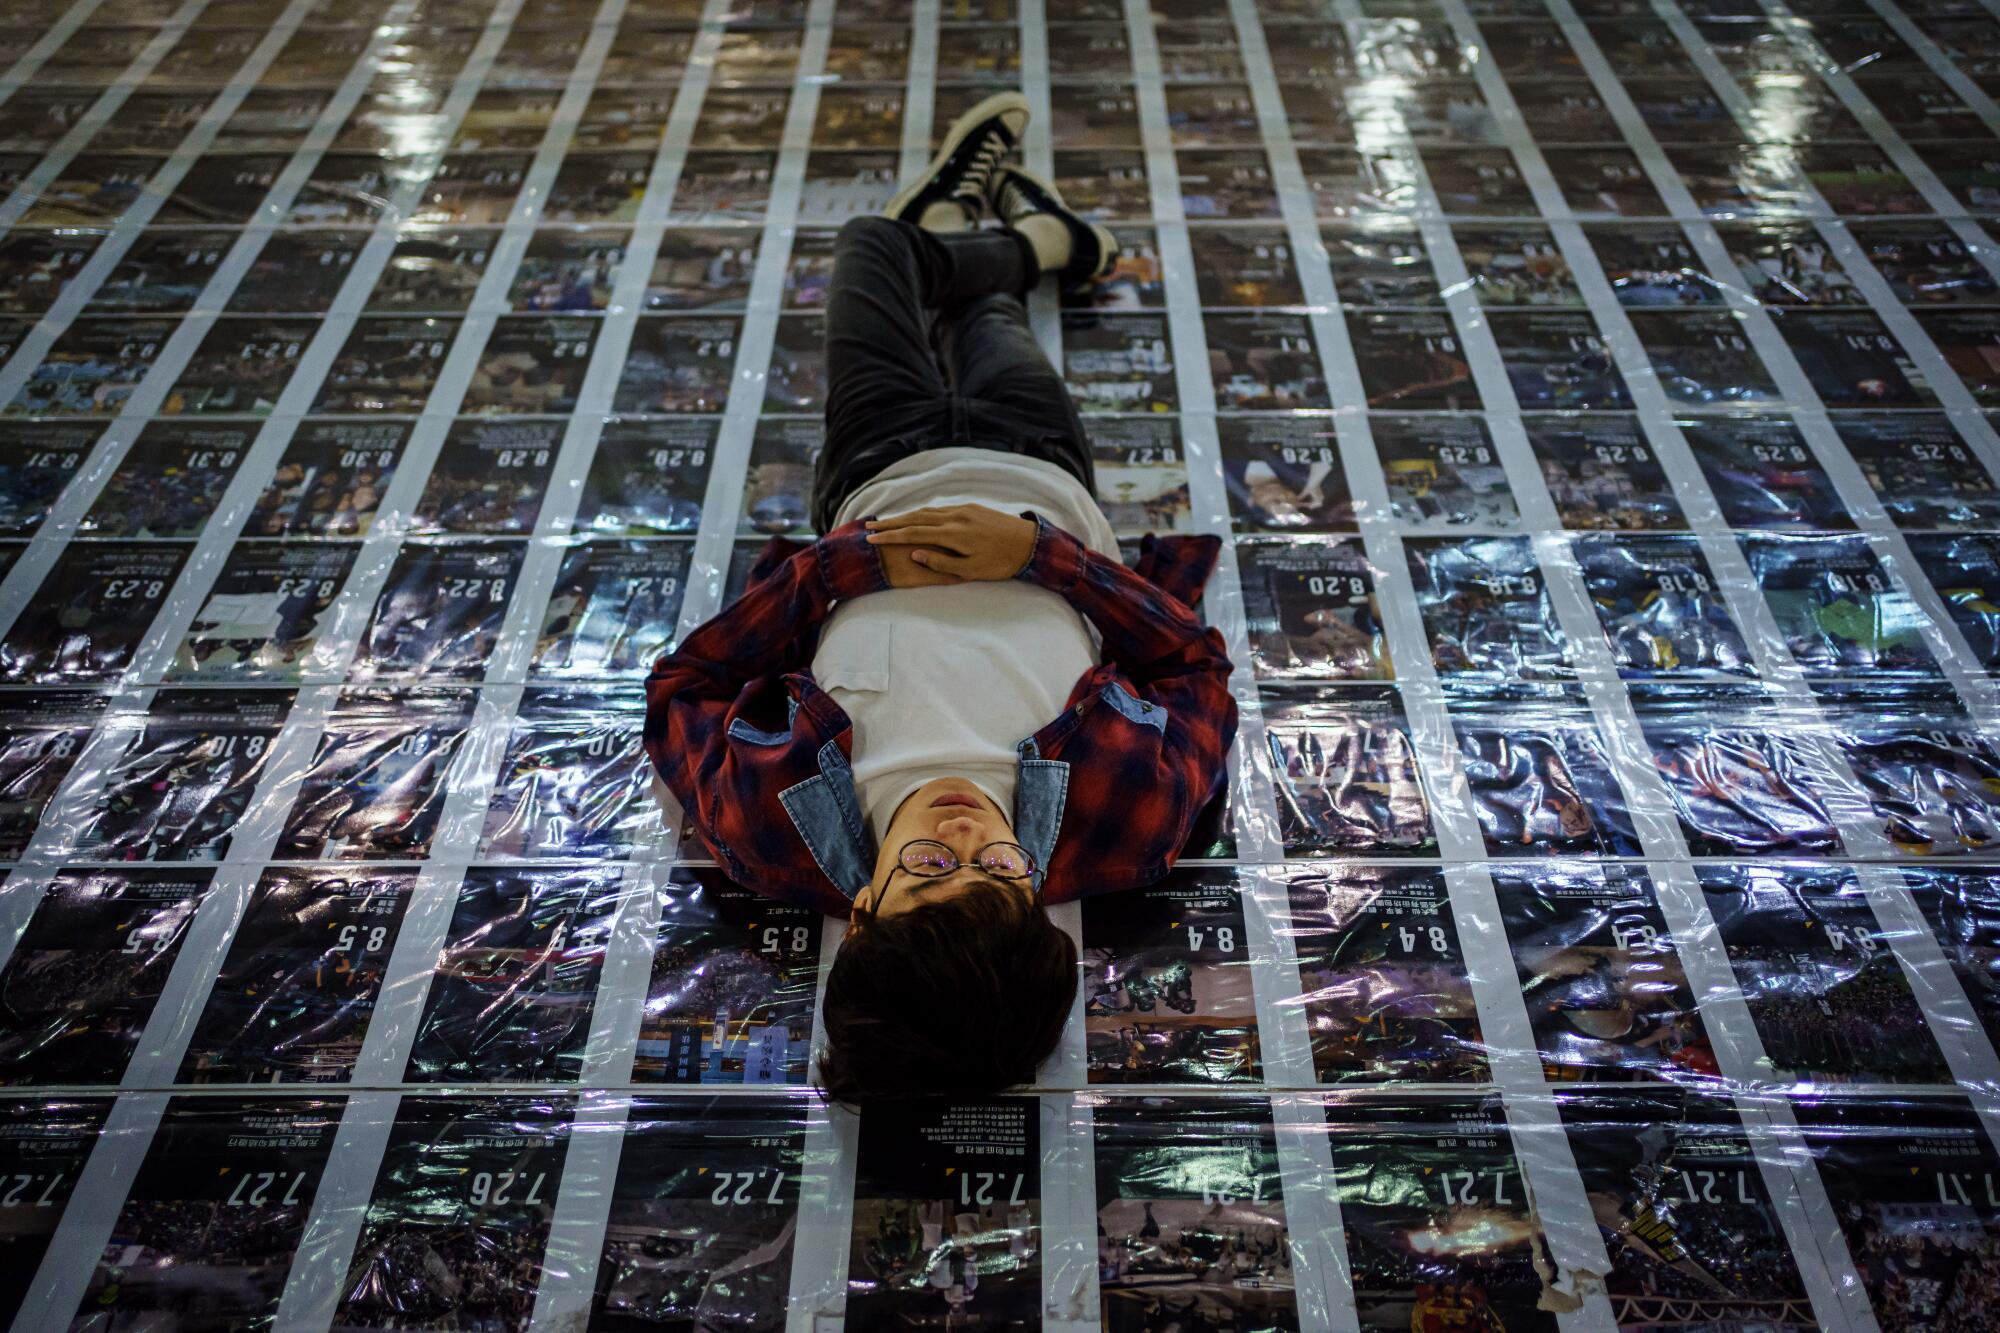 Ben Chan, a vocalist for the band Boyz Reborn, lies down on protest posters at his college.